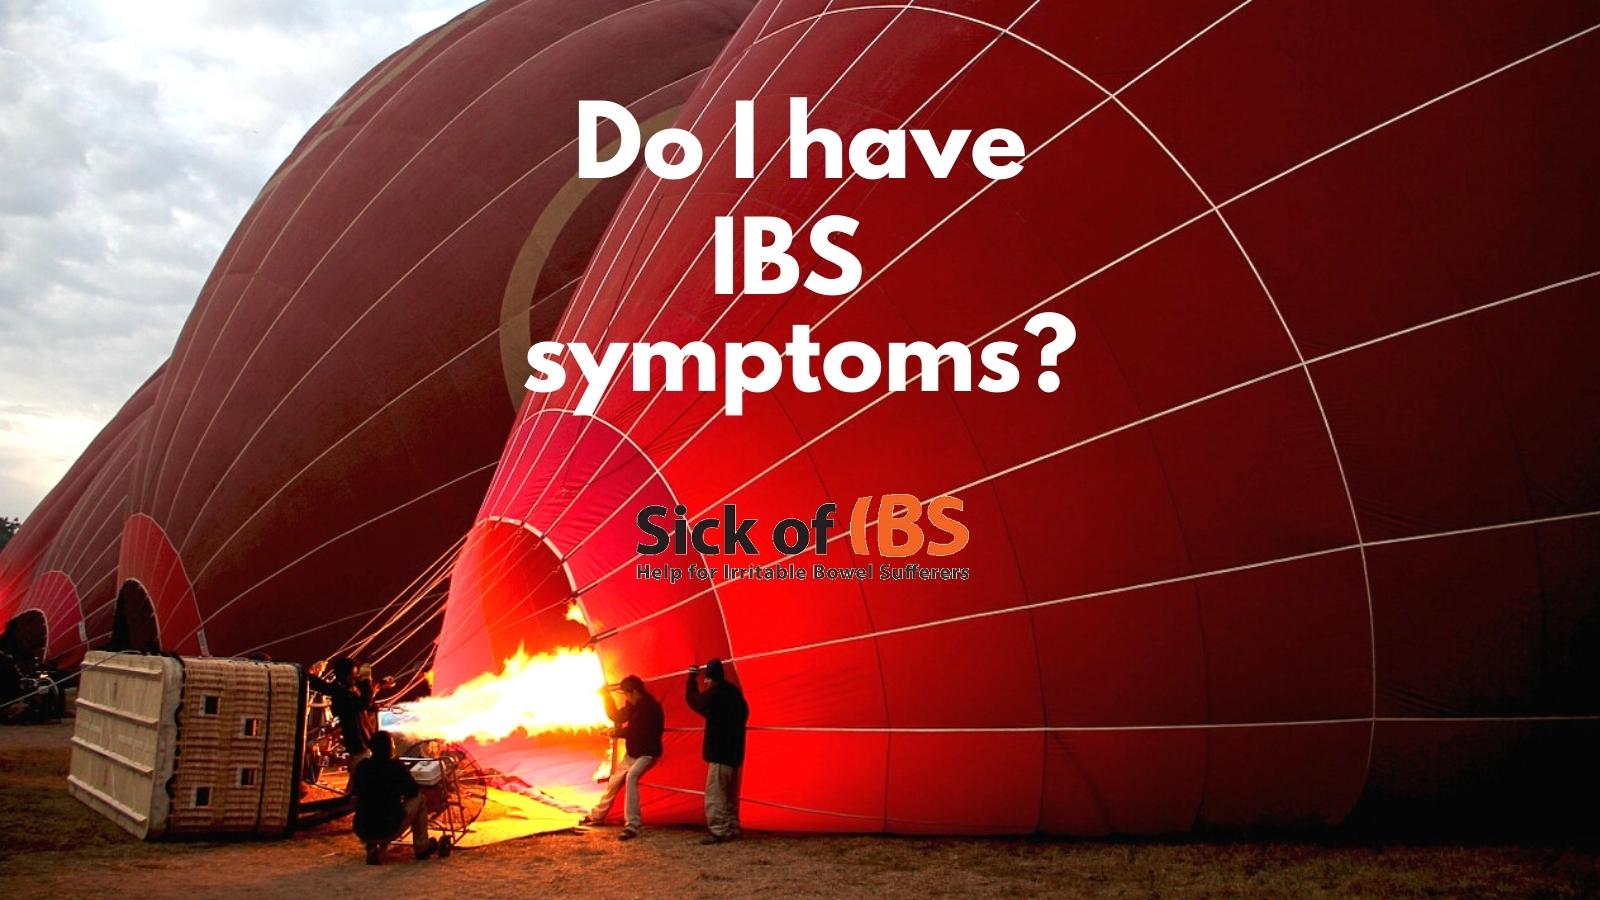 Is it embarrassing to have ibs?